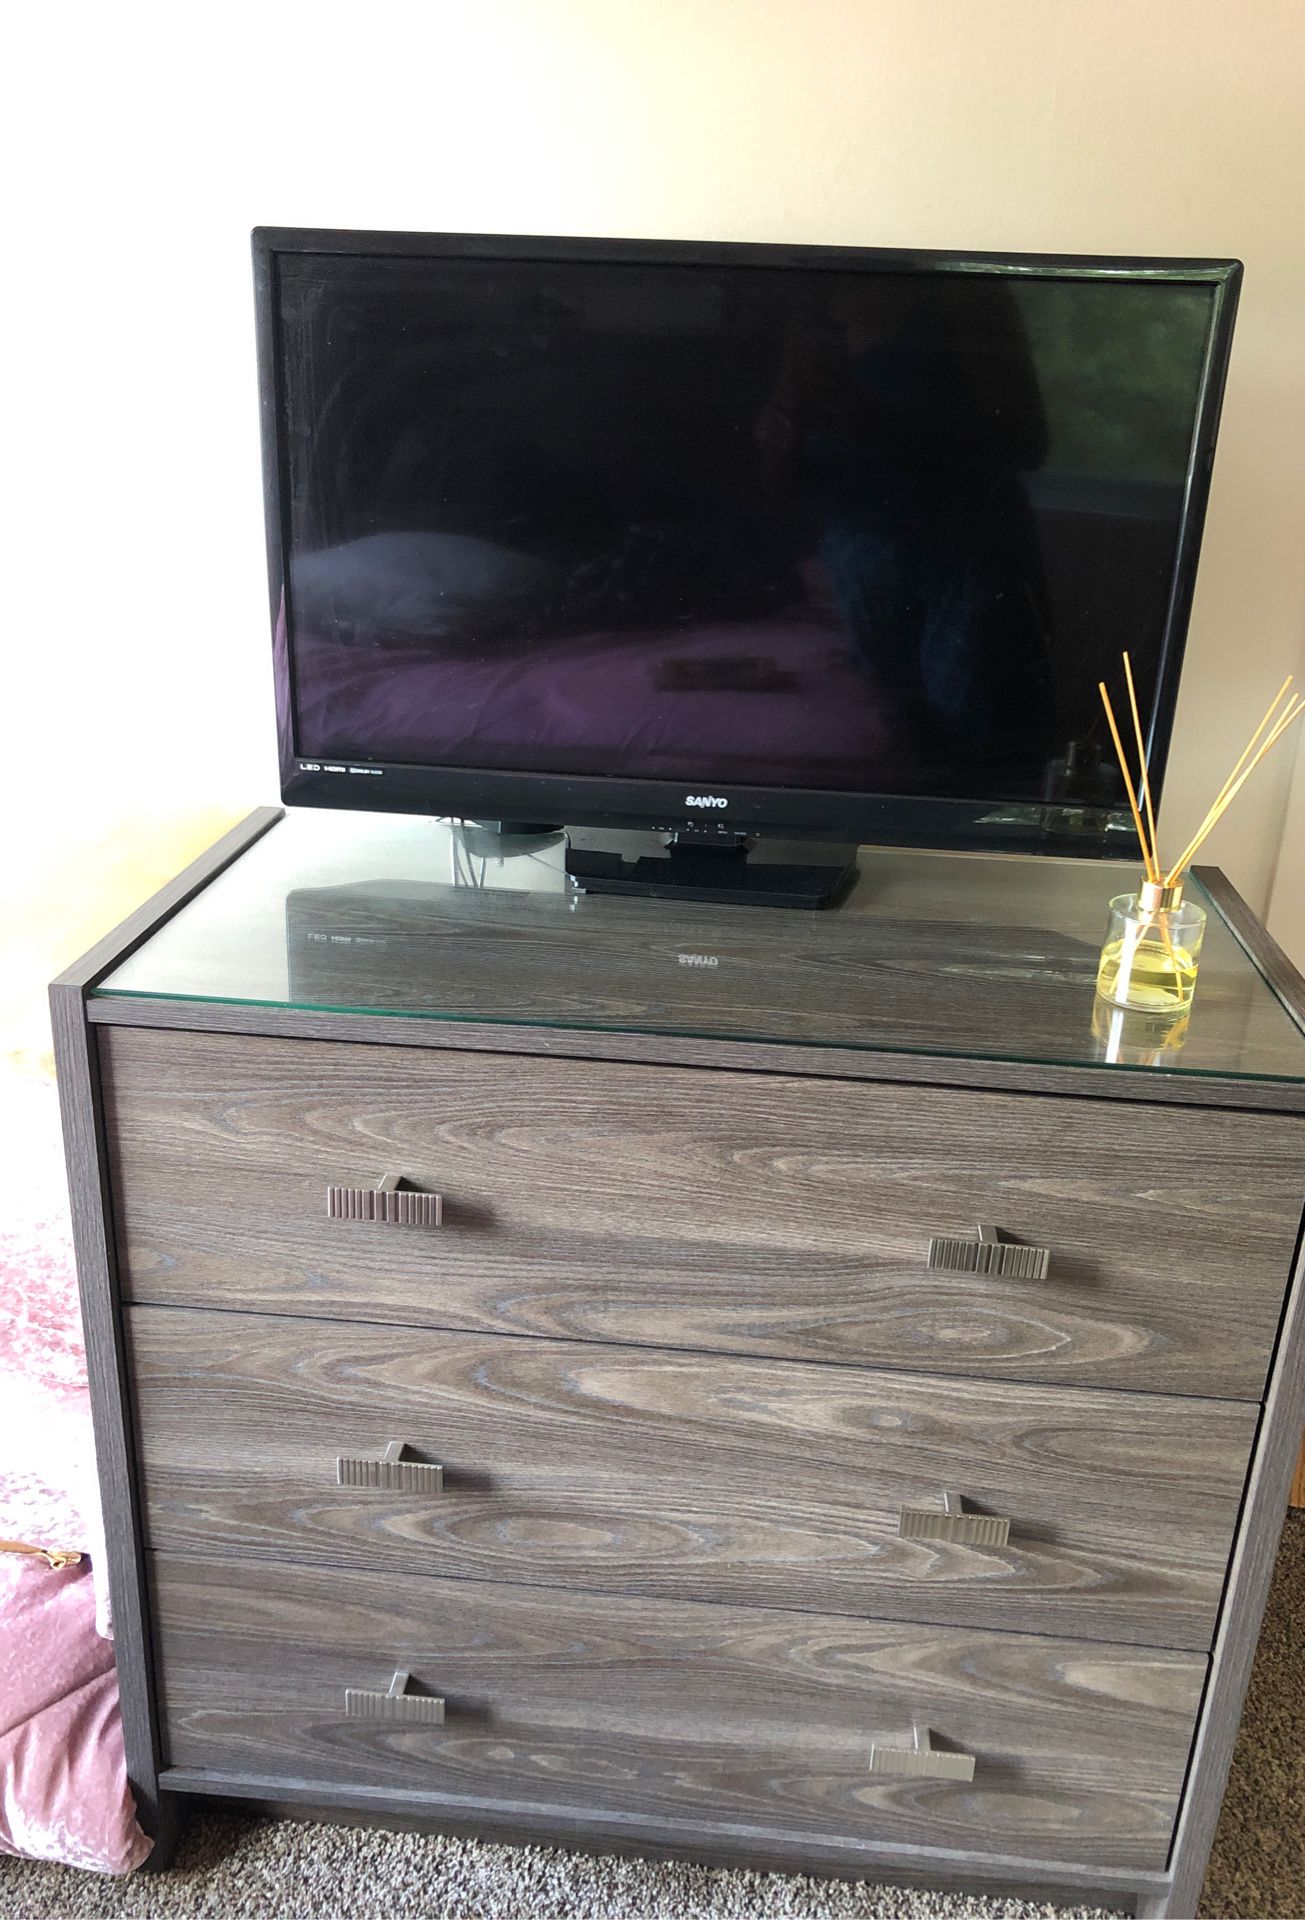 “ 32” TV’S for $60